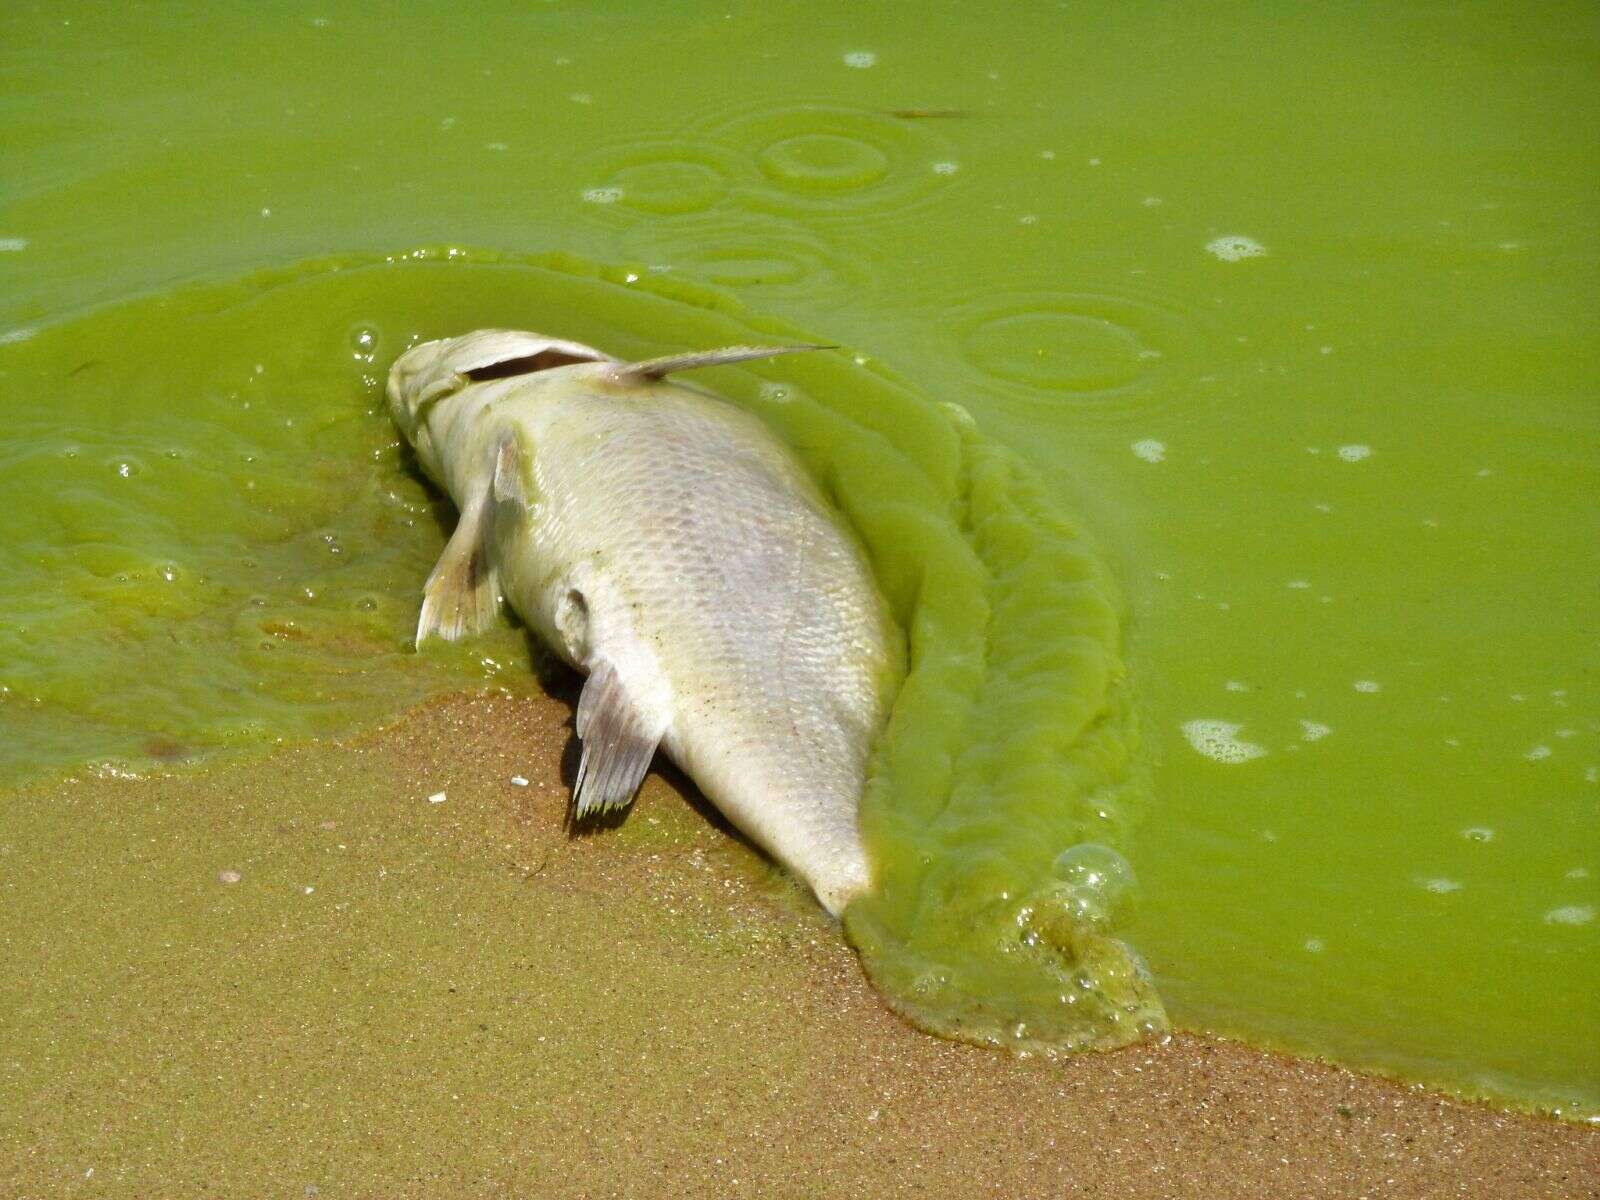 Dead fish in algae filled water in the Gulf of Mexico